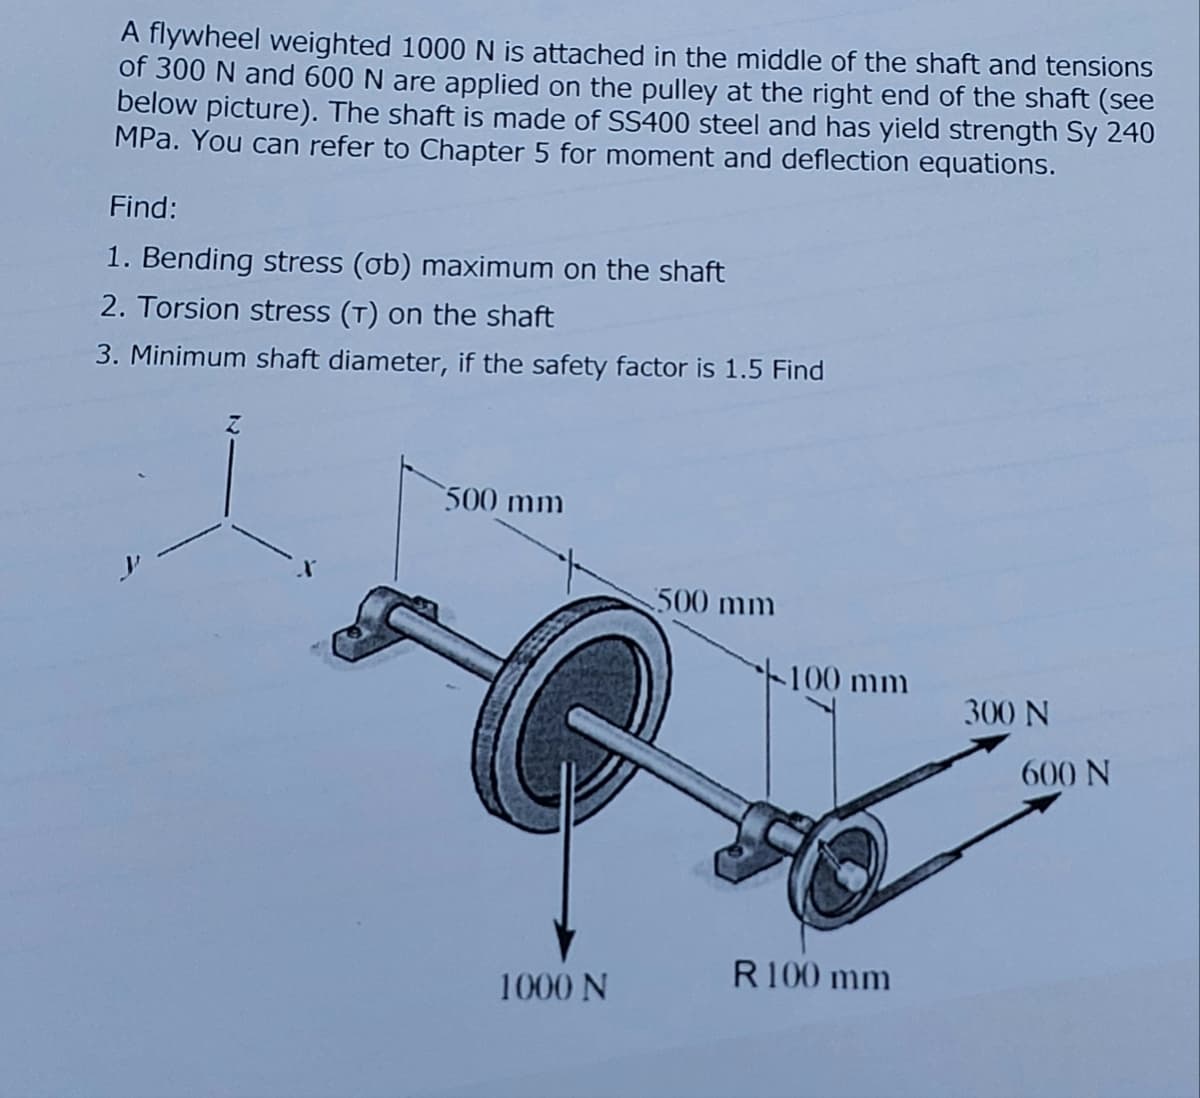 A flywheel weighted 1000 N is attached in the middle of the shaft and tensions
of 300 N and 600 N are applied on the pulley at the right end of the shaft (see
below picture). The shaft is made of SS400 steel and has yield strength Sy 240
MPa. You can refer to Chapter 5 for moment and deflection equations.
Find:
1. Bending stress (ob) maximum on the shaft
2. Torsion stress (T) on the shaft
3. Minimum shaft diameter, if the safety factor is 1.5 Find
500 mm
1000 N
.500 mm
100 mm
R100 mm
300 N
600 N